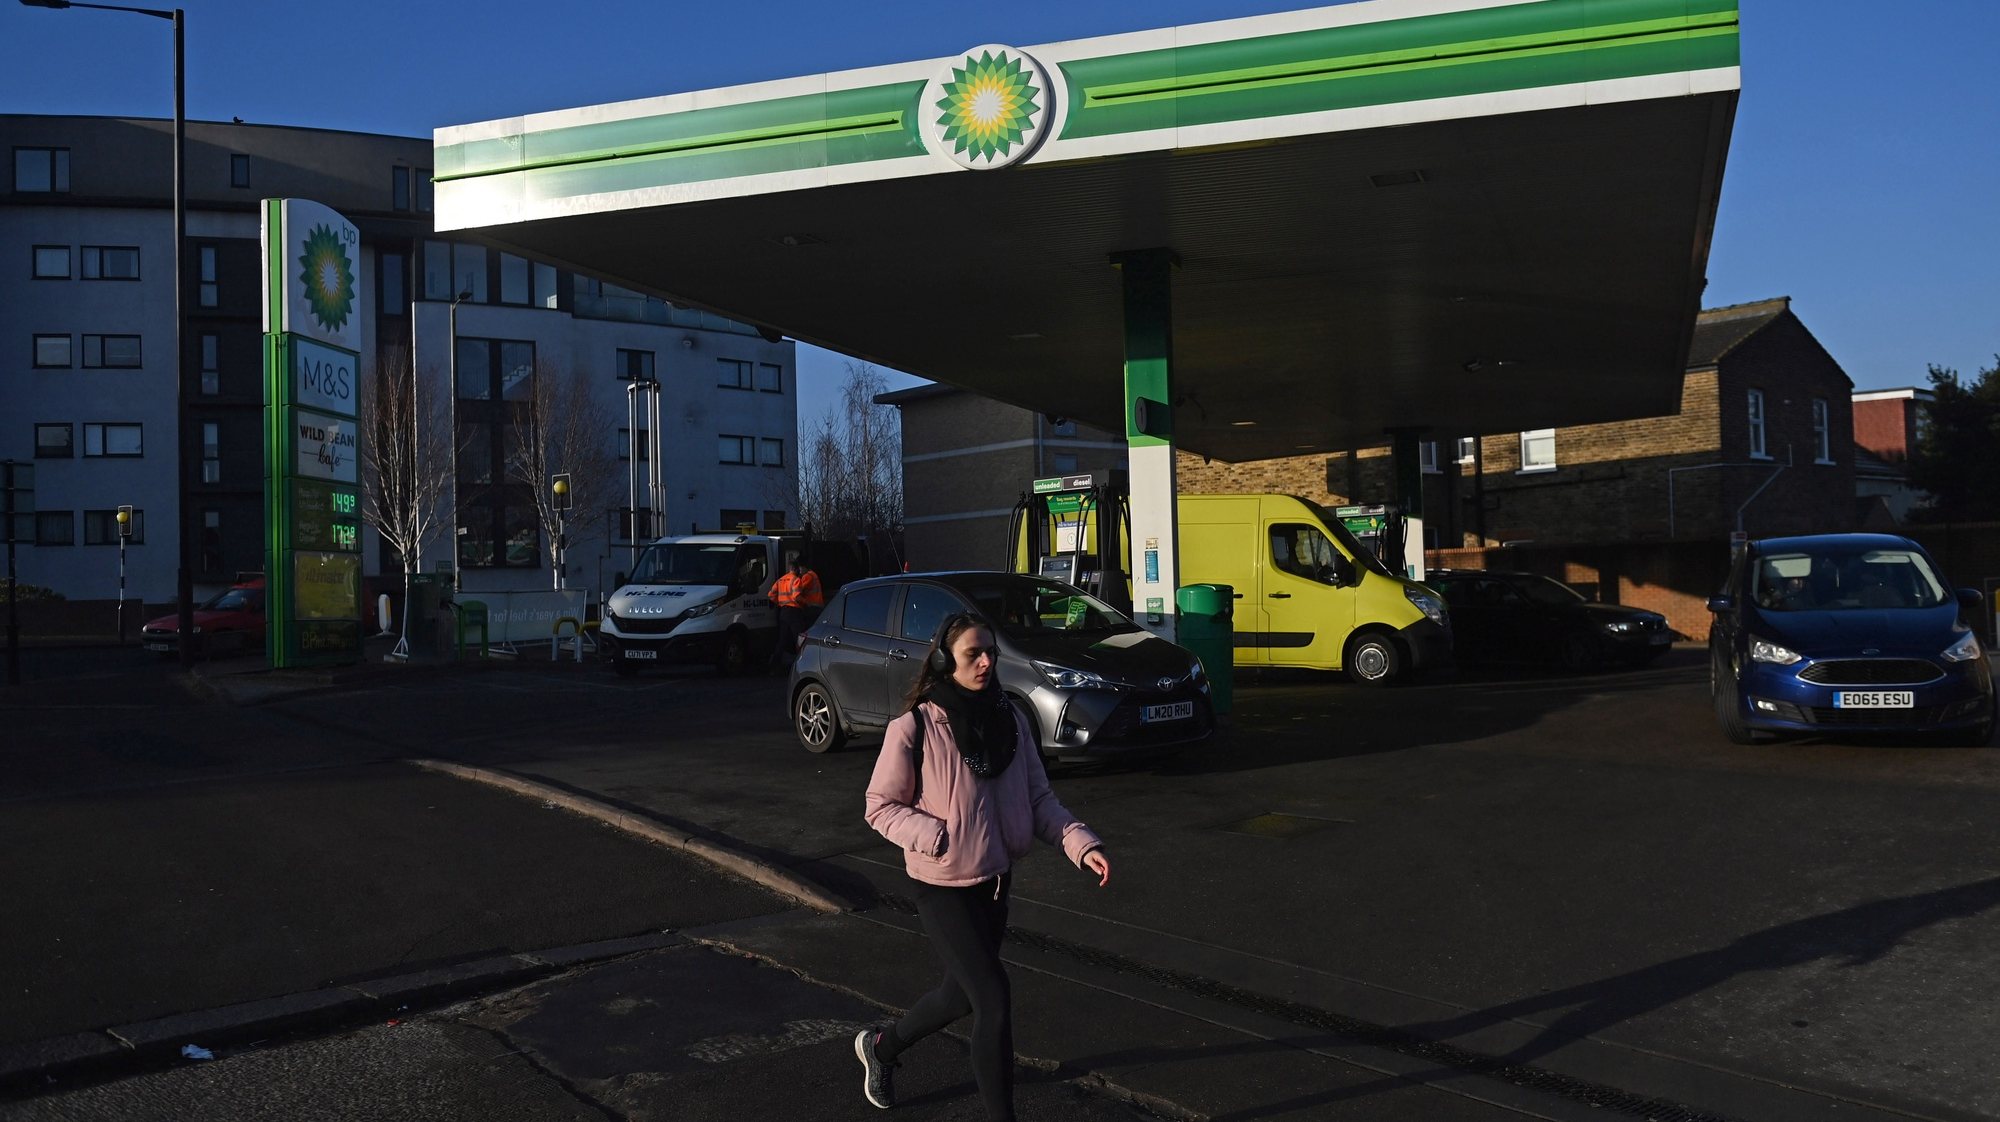 epa10452251 A logo is displayed at a BP fuel station and garage in London, Britain, 07 February 2023. Energy company BP reported record annual profits as it scaled back plans to reduce the amount of oil and gas it produces by 2030. Its profits more than doubled to 27.7 billion US dollars in 2022, as energy prices soared after Russia invaded Ukraine.  EPA/NEIL HALL